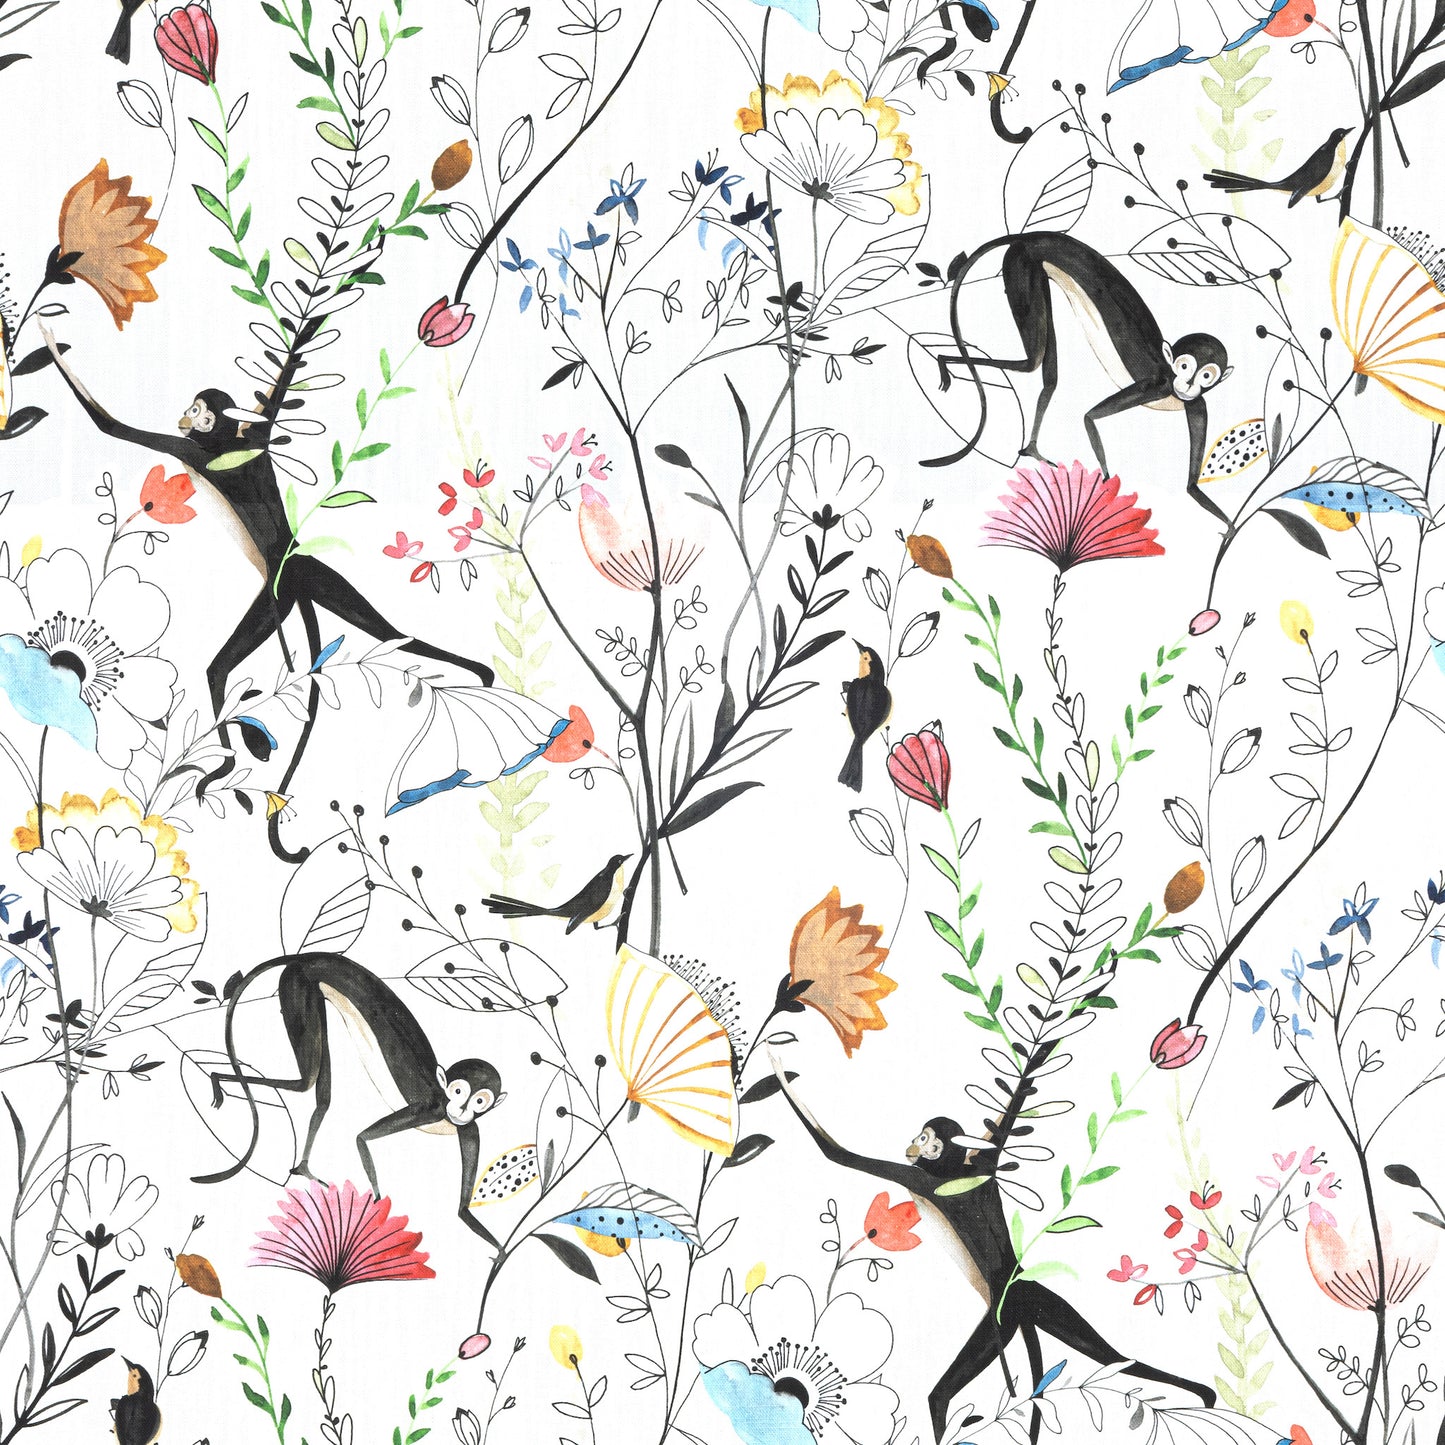 Duvet Cover in Entangled, a Monkey & Bird Watercolor Floral Jungle